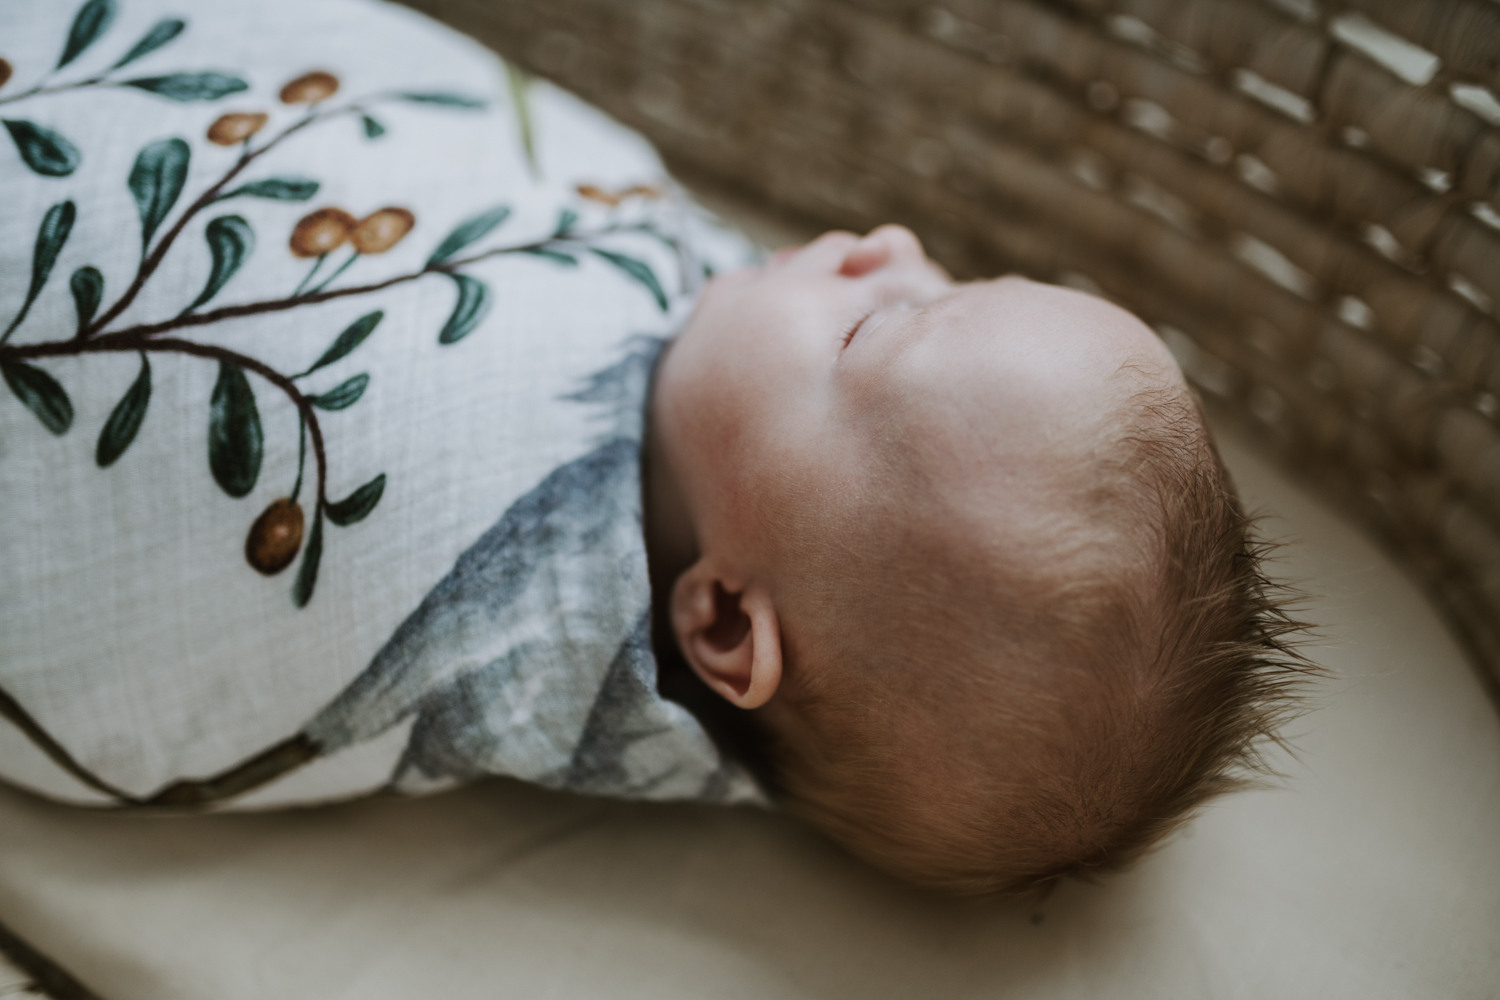 Newborn baby boy wrapped in a leafy blanket while laying in bassinet